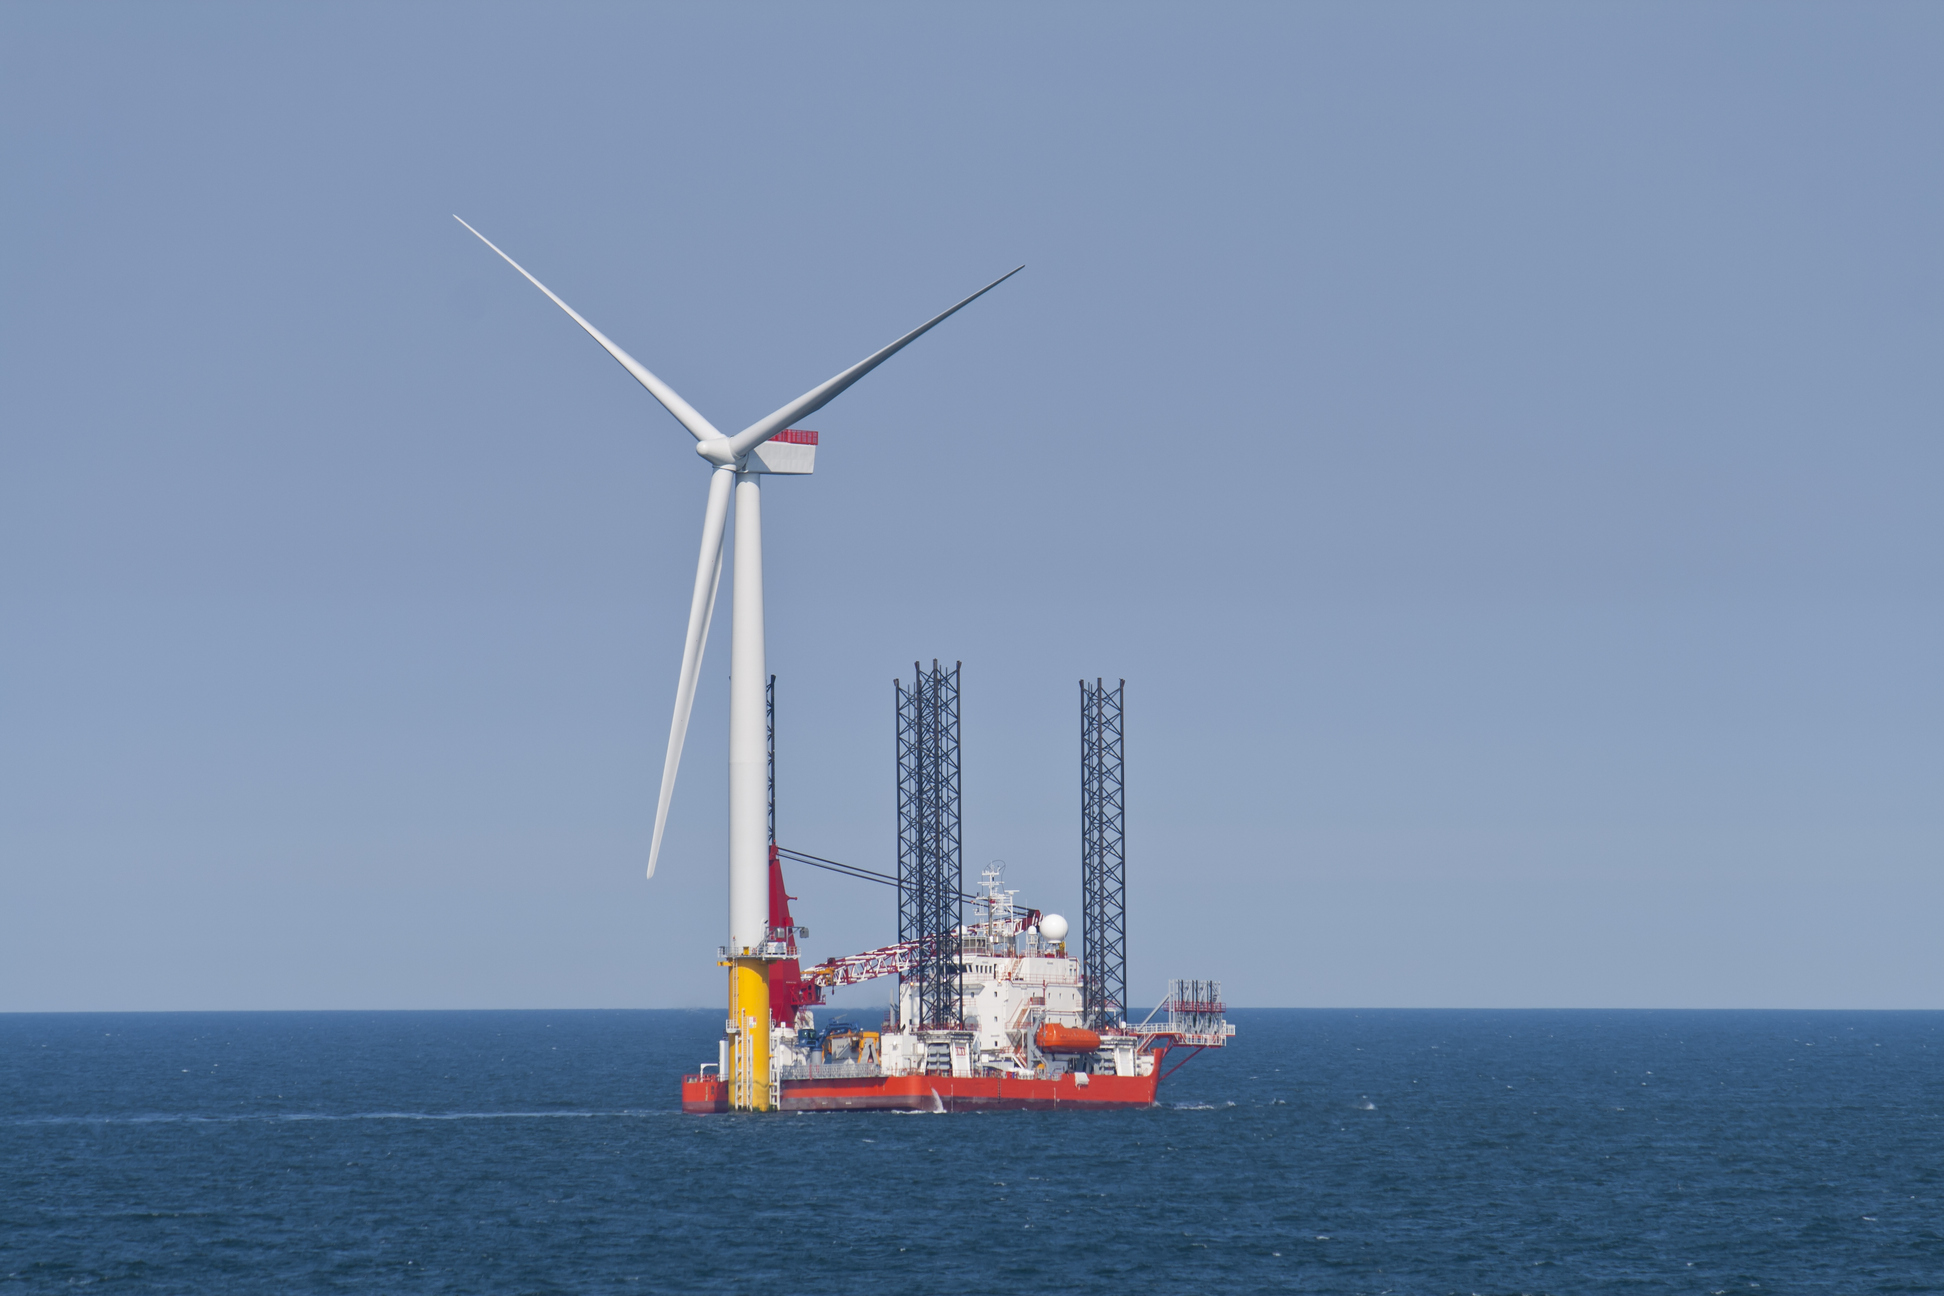 IS OFFSHORE WIND LOST IN THE PERFECT STORM? THE ANSWER IS BLOWING IN THE WIND… 離岸風電迷失在超完美的風暴中！風繼續吹？